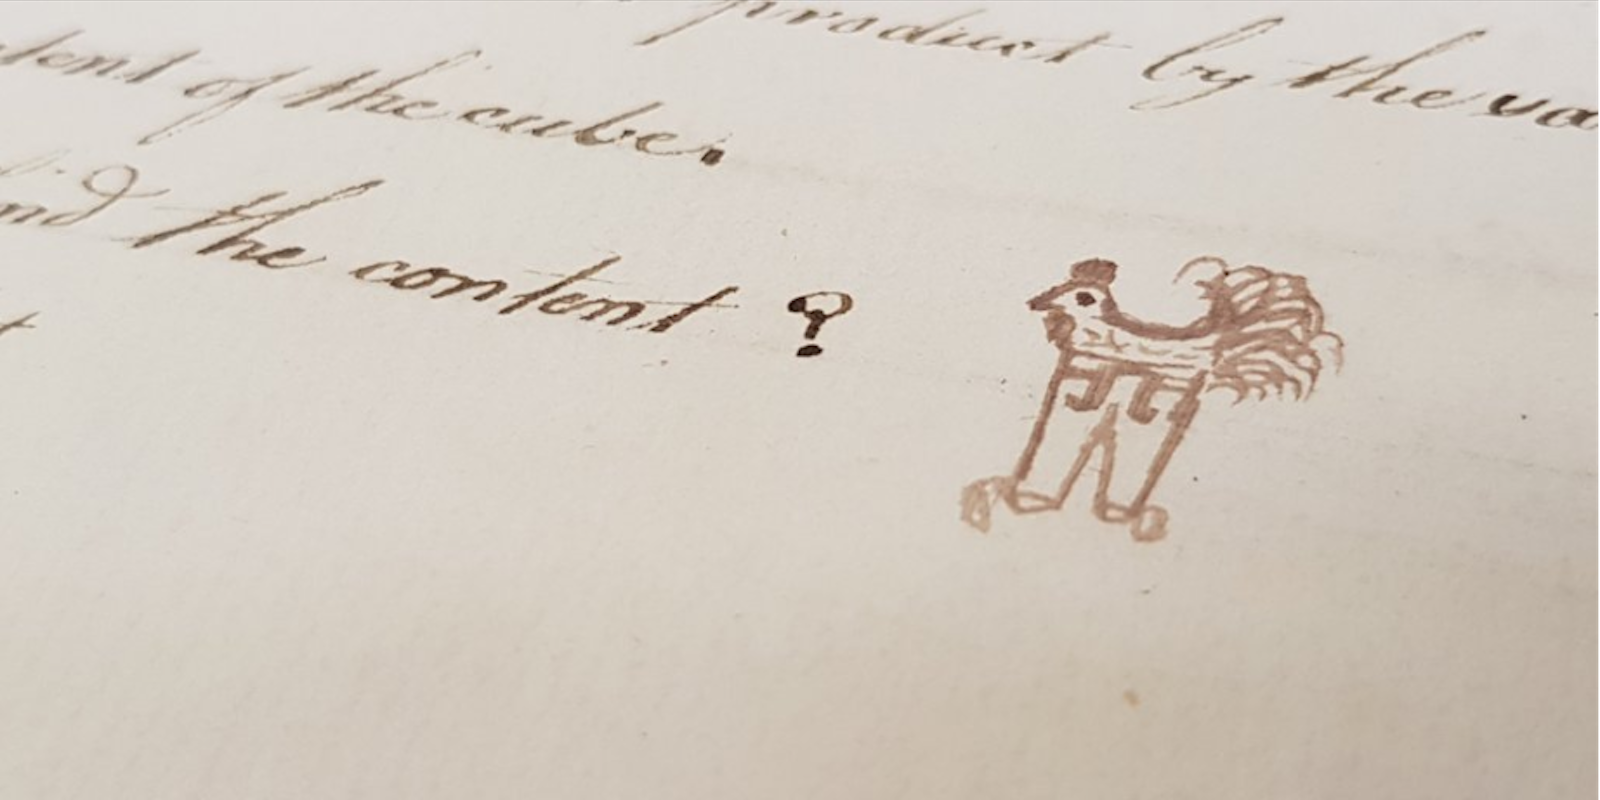 18th-century doodle from the MERL